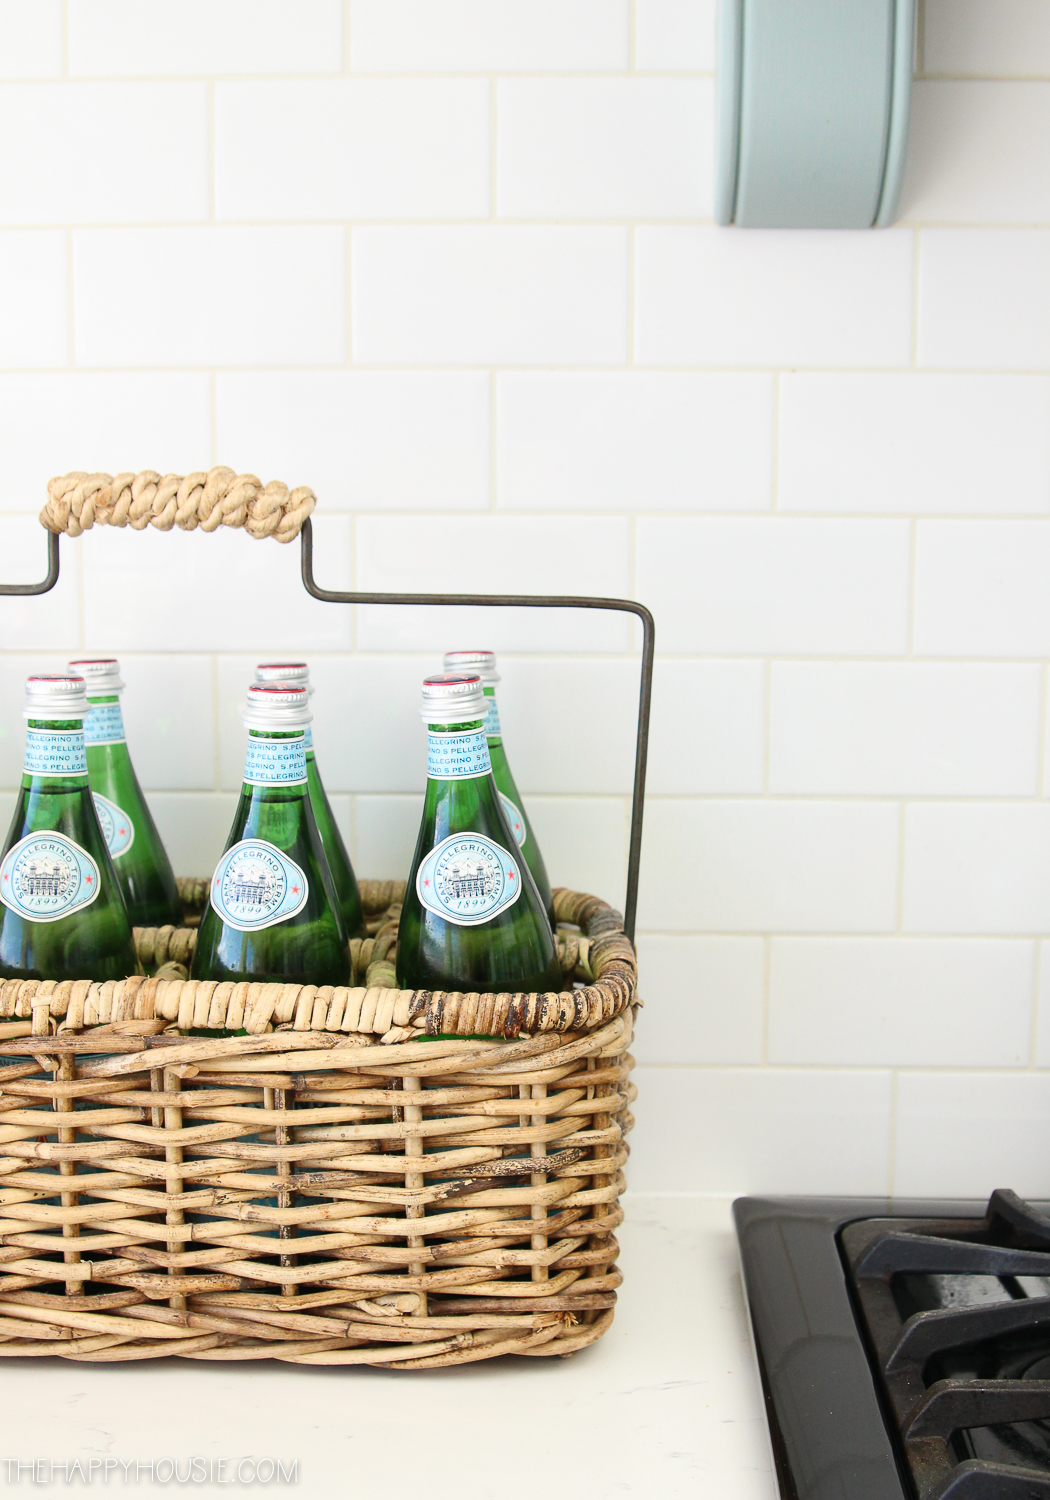 A wicker basket full of Pellegrino on the counter.